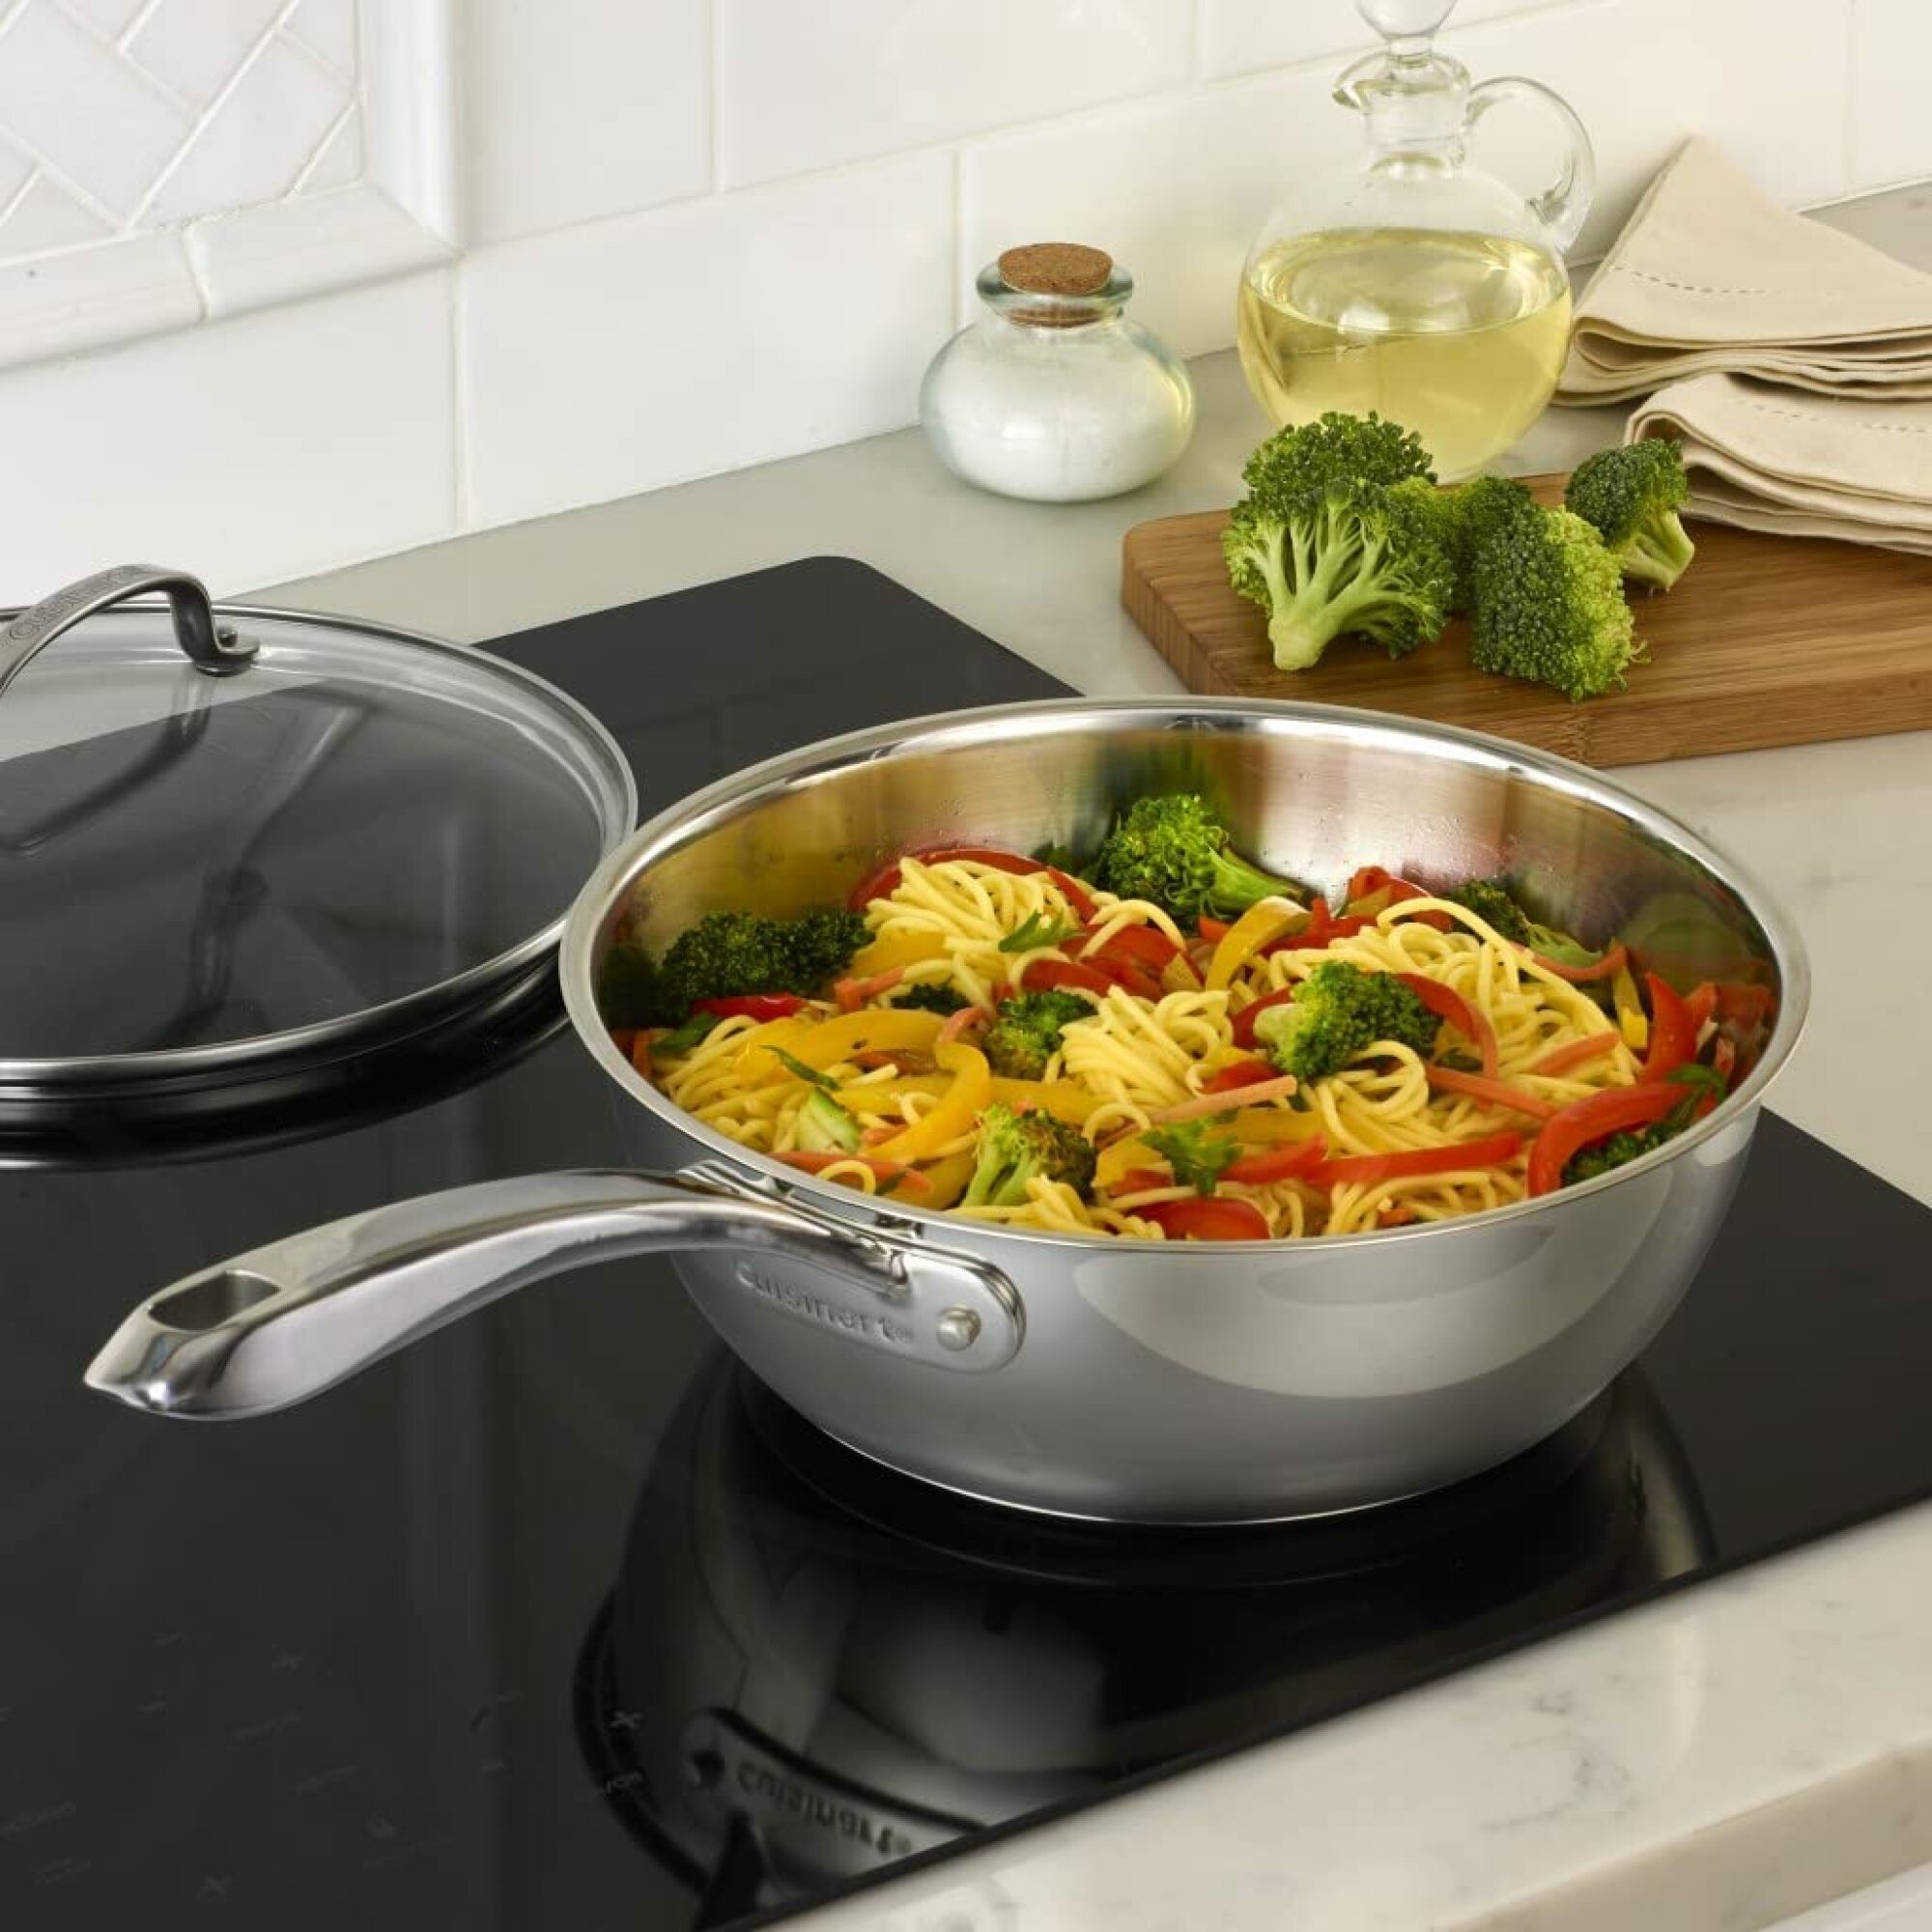 The Cuisinart Stainless Steel Chef's Pan (3 quarts) used to cook a meal.